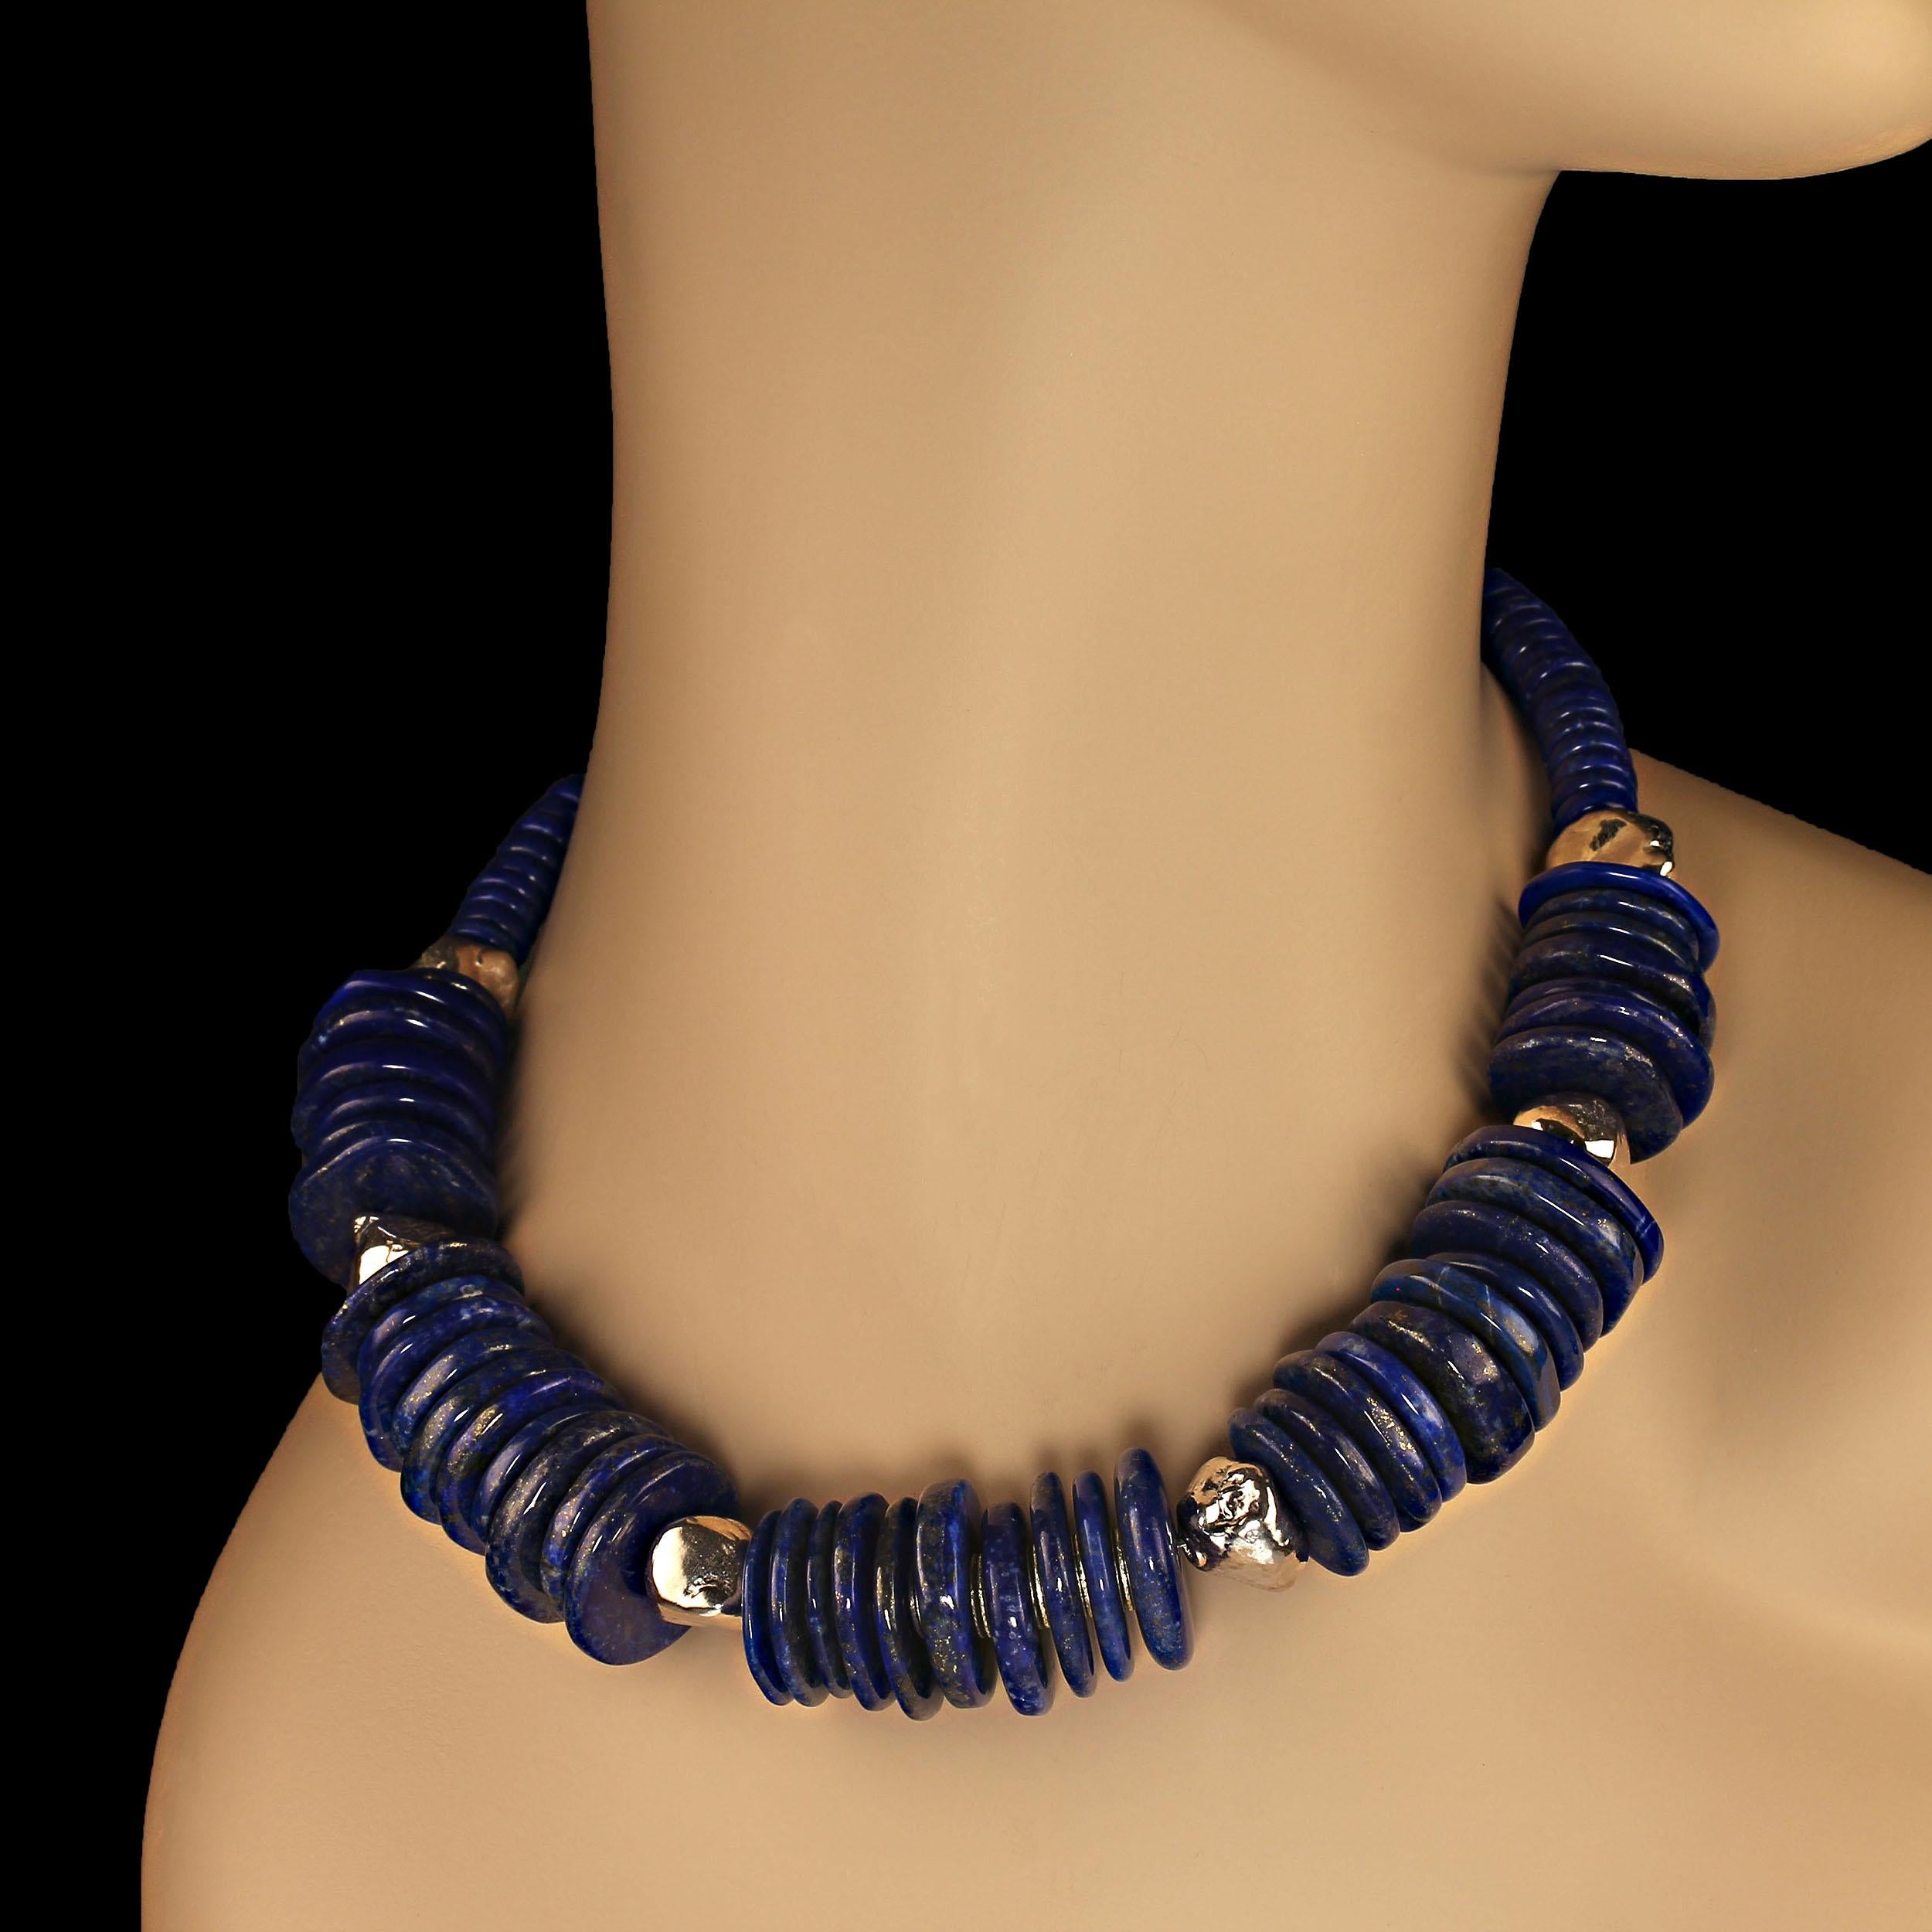 17 Inch Magnificent Lapis Lazuli and Sterling Silver Choker necklace. These large lapis lazuli, 20 mm, slices create a wide necklace such that the interior of it  is closer to 15 inches. This gorgeous necklace is secured with a large silver hook and